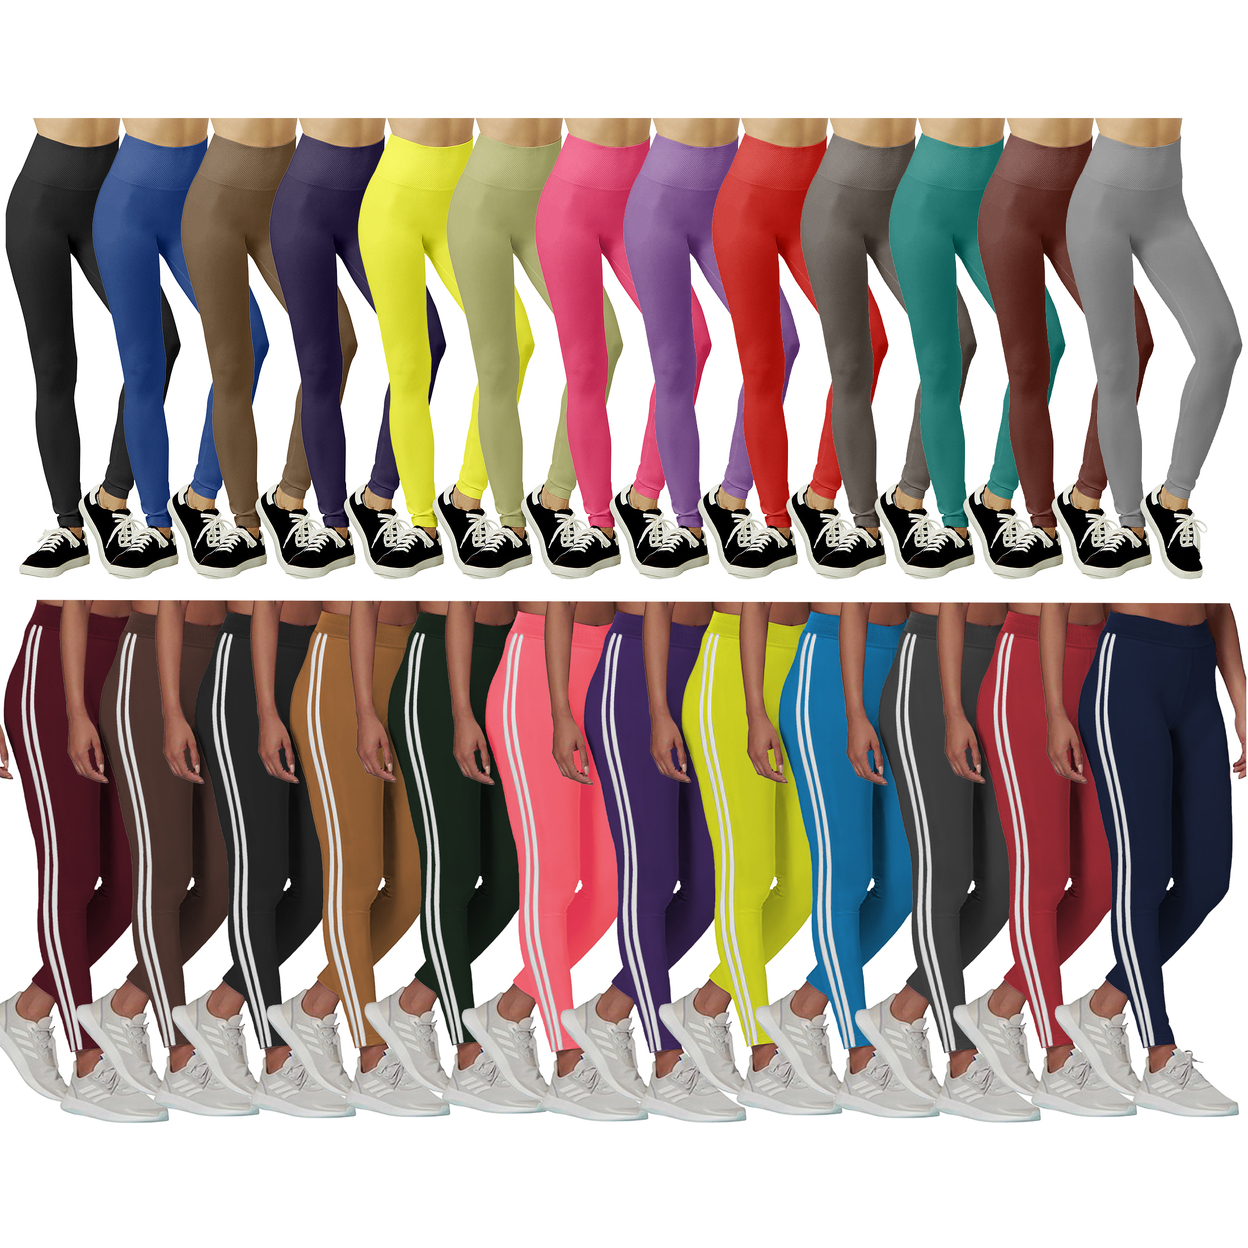 5-Pack: Women's Ultra-Soft Smooth High Waisted Fleece Lined Winter Warm Cozy Leggings - Striped, Large/x-large